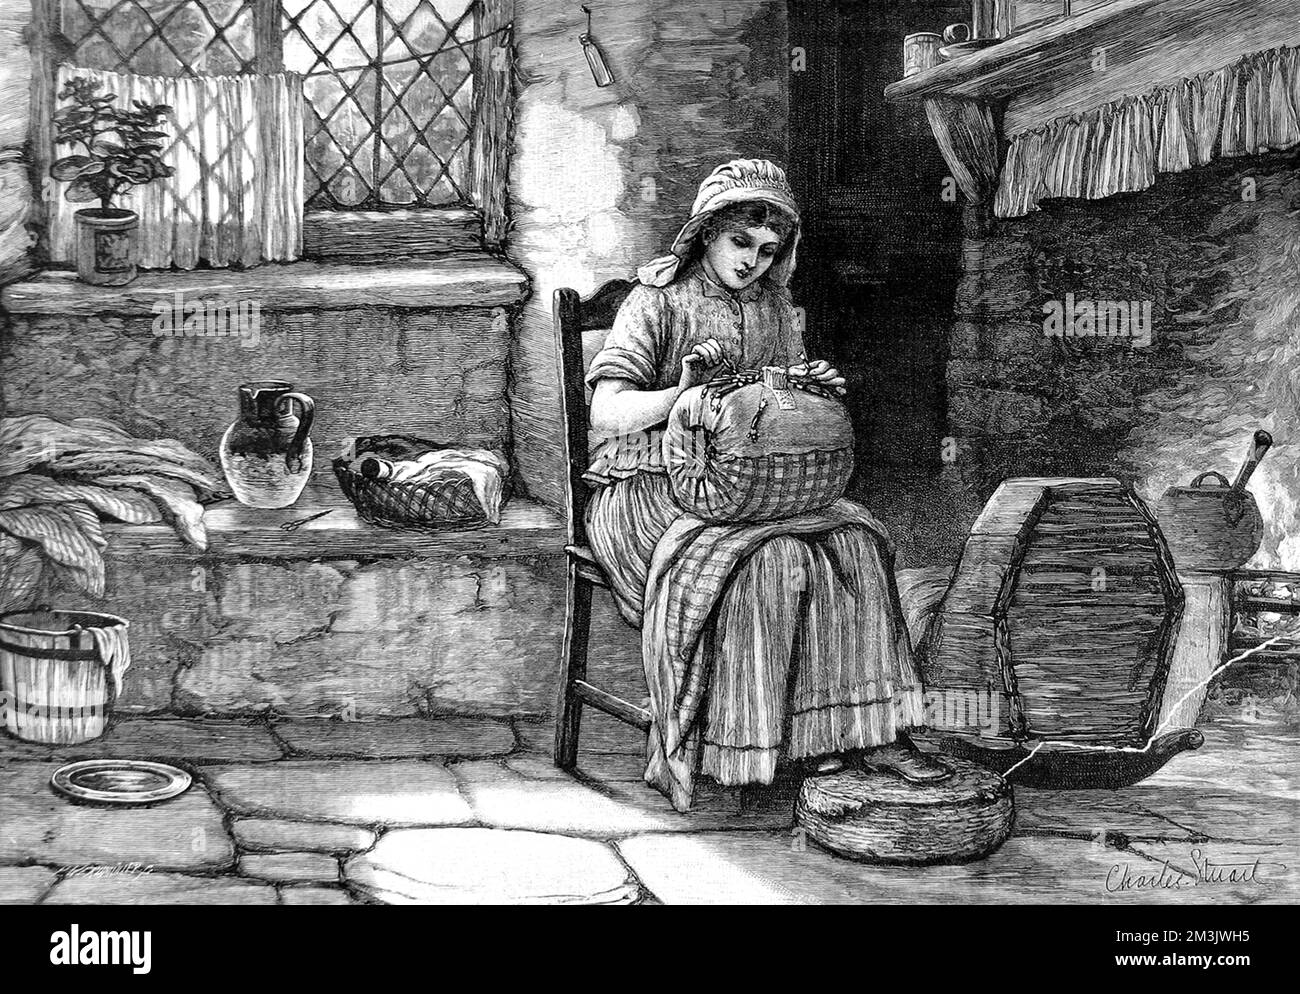 Lace-making was a typical cottage industry and could be carried out independently by women in their homes. The woman in the picture sits by the hearth in a cottage with a bolster-style pillow firmly stuffed with straw on her lap. She is interweaving bobbins in order to produce the lace. Lace-makers earned comparatively good wages, but only by working up to twelve hours a day, and consequently suffering poor health.  1878 Stock Photo